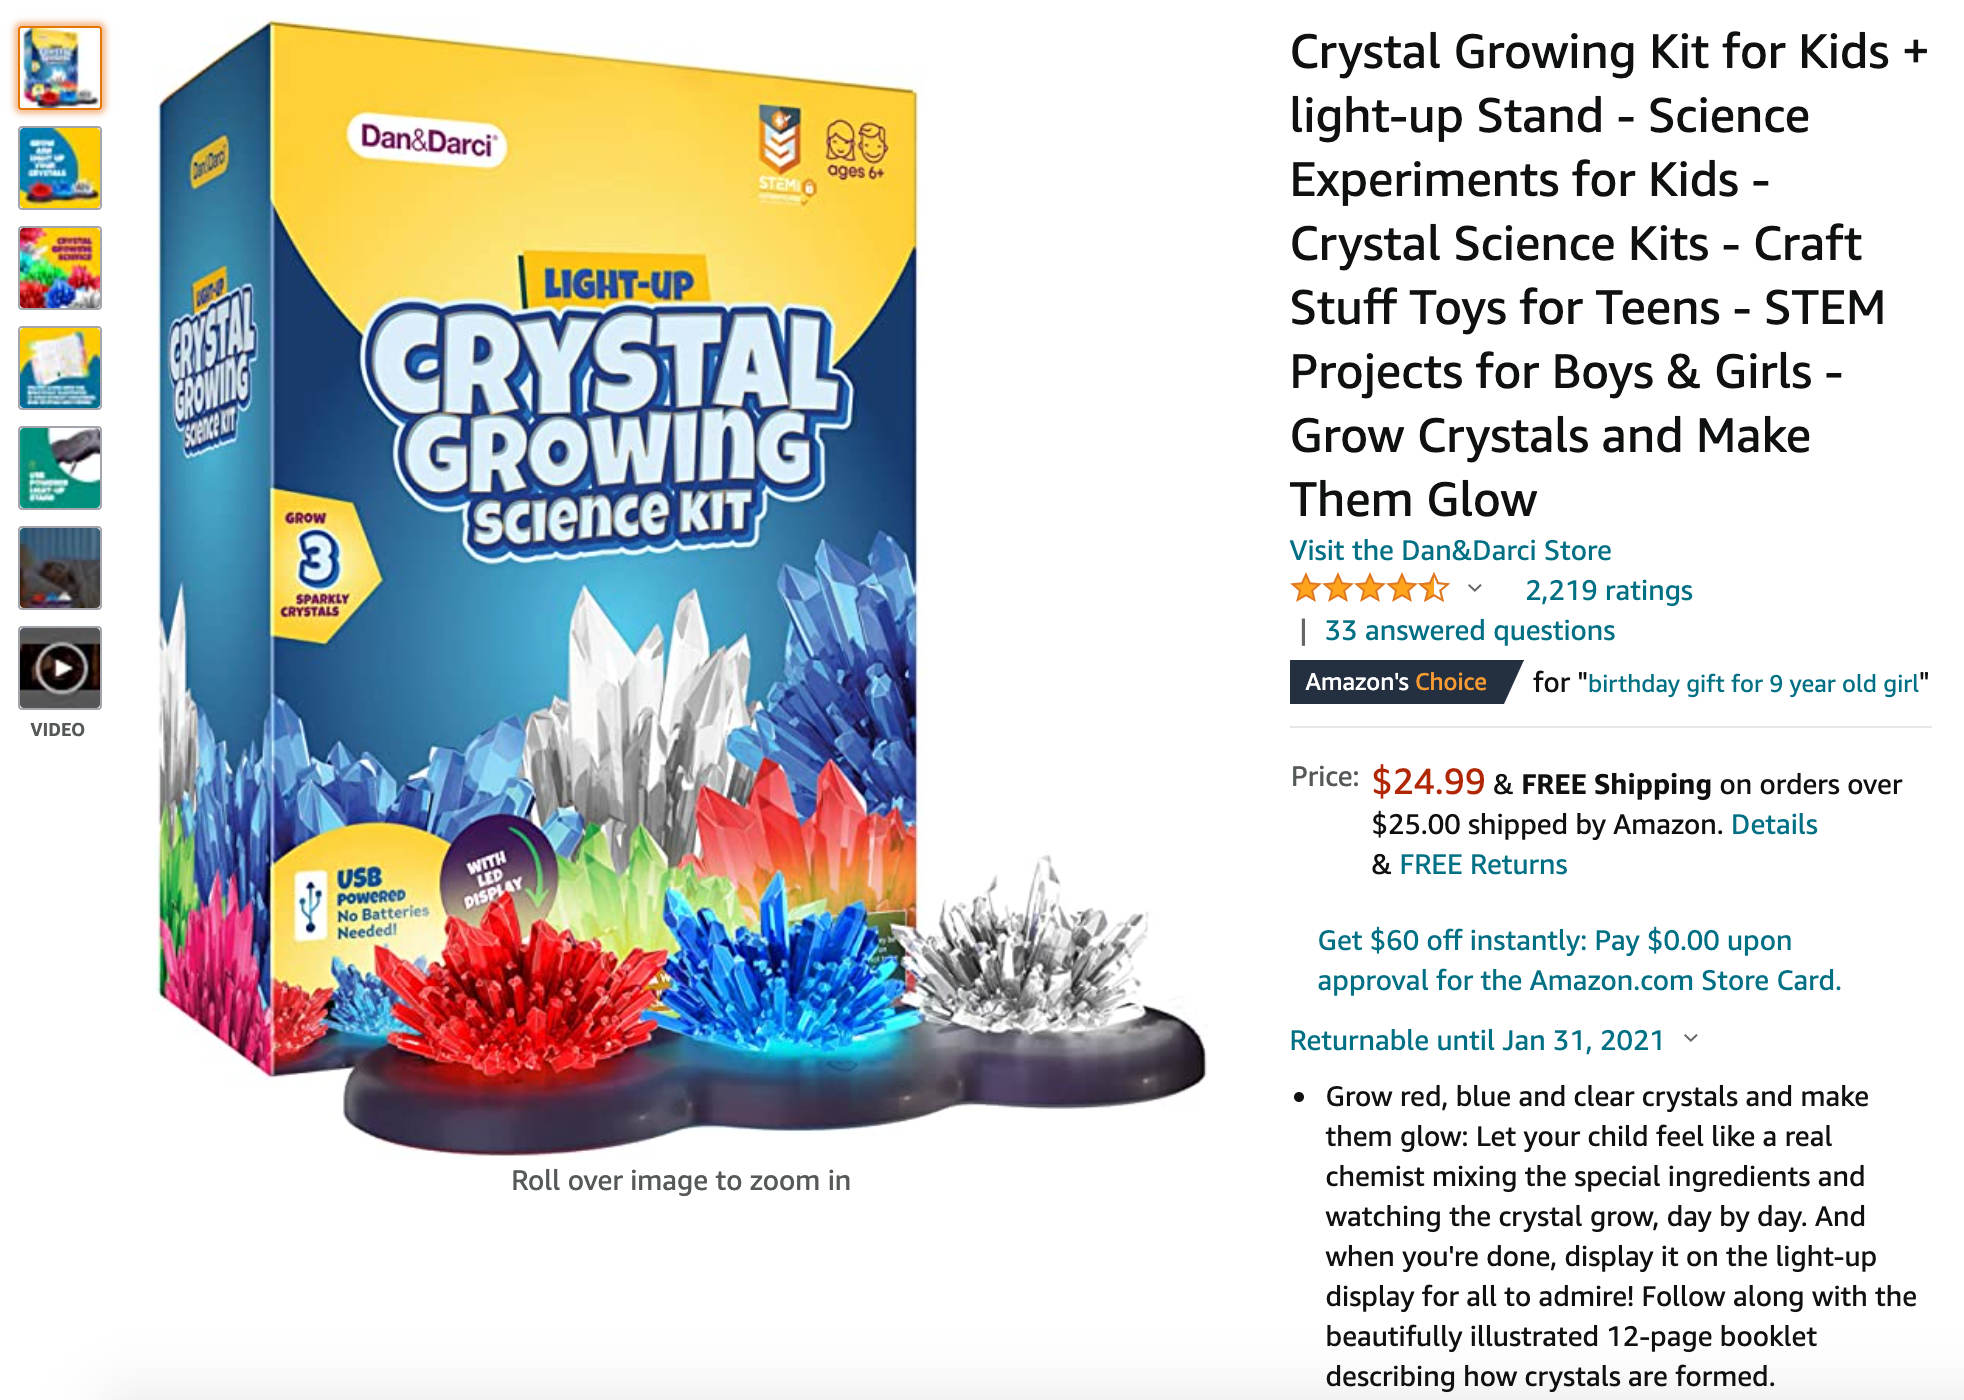 Crystal Growing Kit for Kids + light-up Stand - Science Experiments for Kids - Crystal Science Kits.jpg